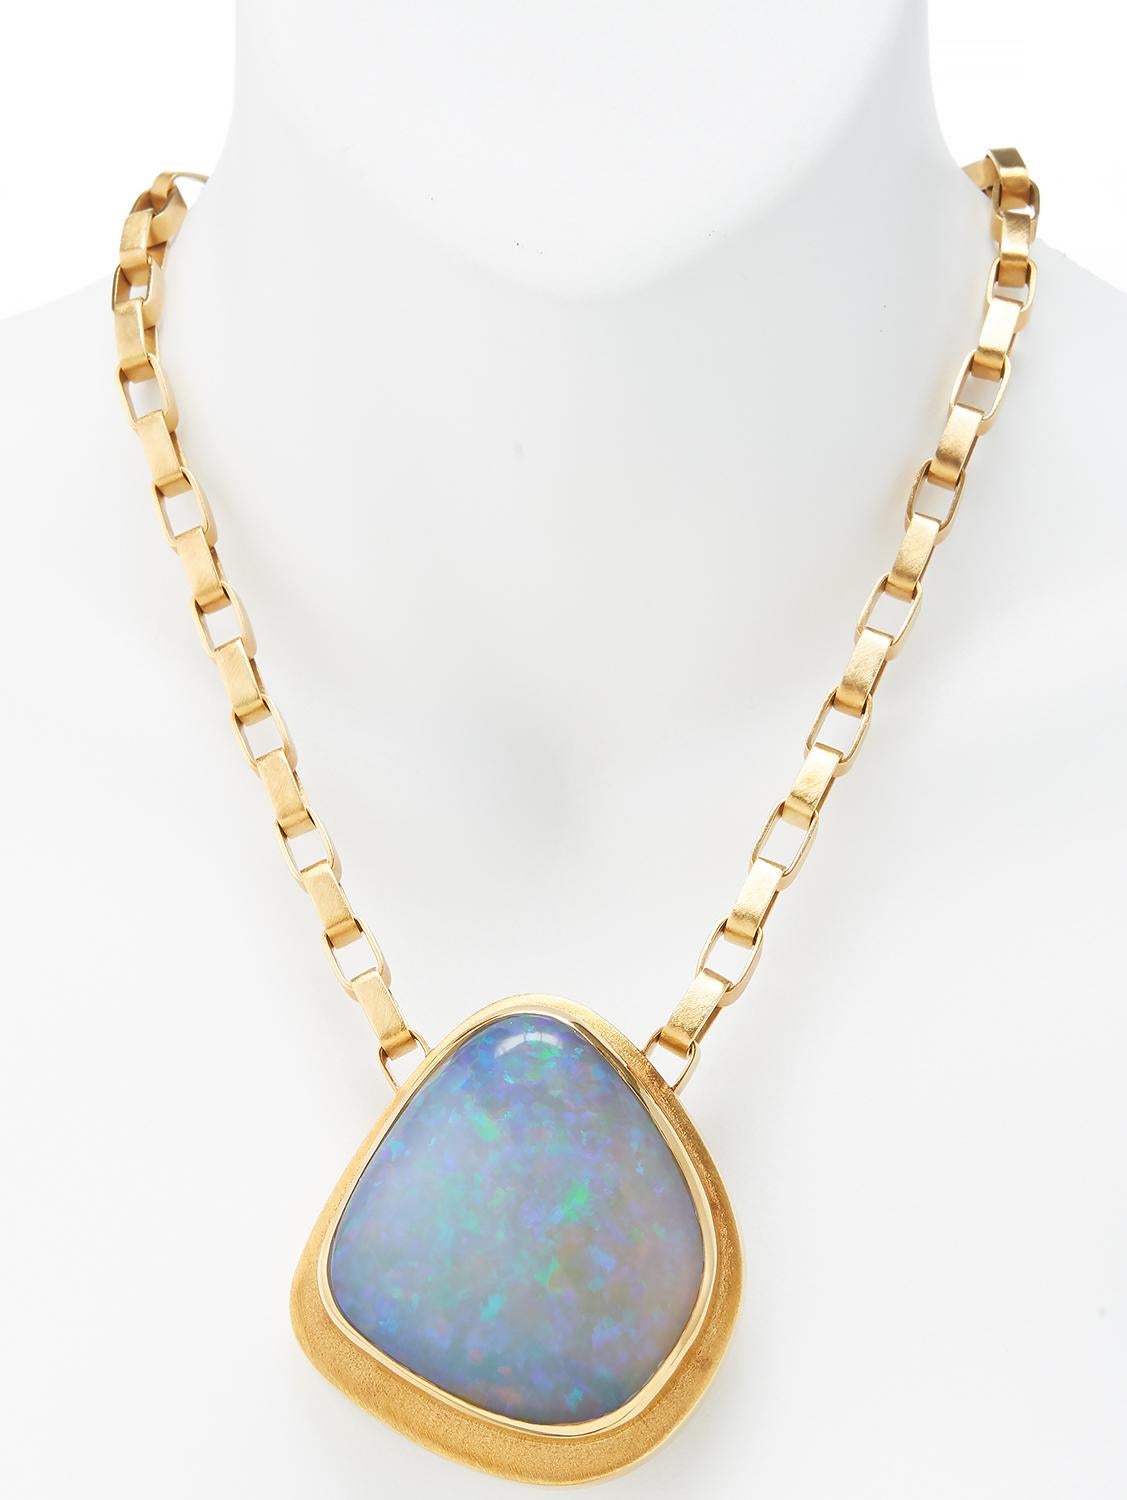 One of the rarest items Burle Marx discovered was a massive opal crystal that was gem quality, and yielded over 3000 carats of incredibly fine opals and weighed an astonishing 6 lbs. The late Paul Desautels, the most influential American curator of